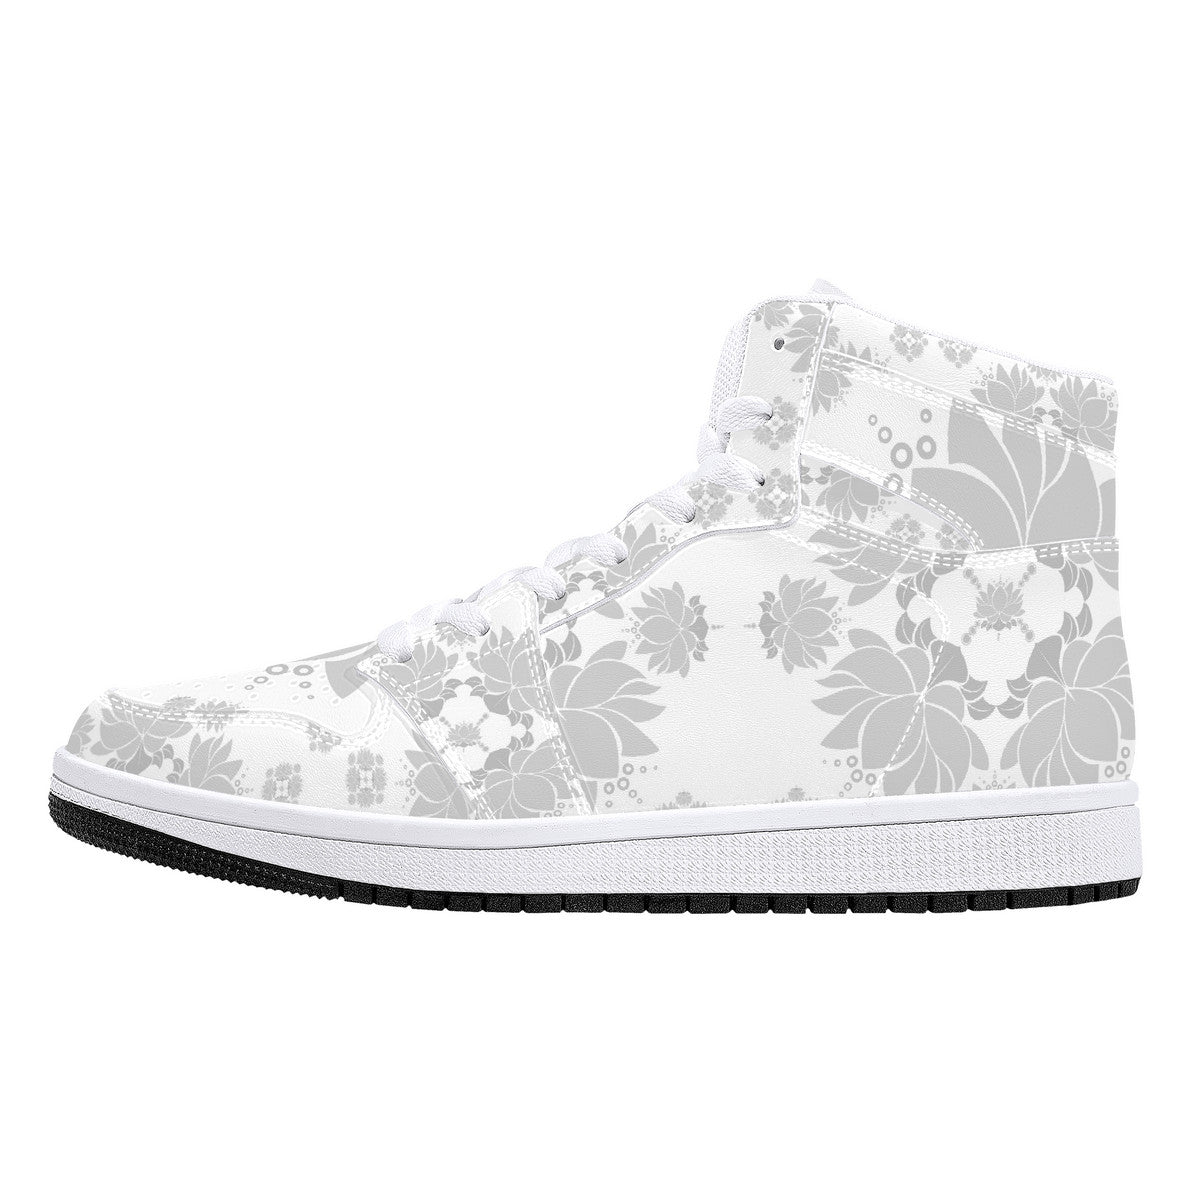 "Nix Lotus" High-Top Synthetic Leather Sneakers